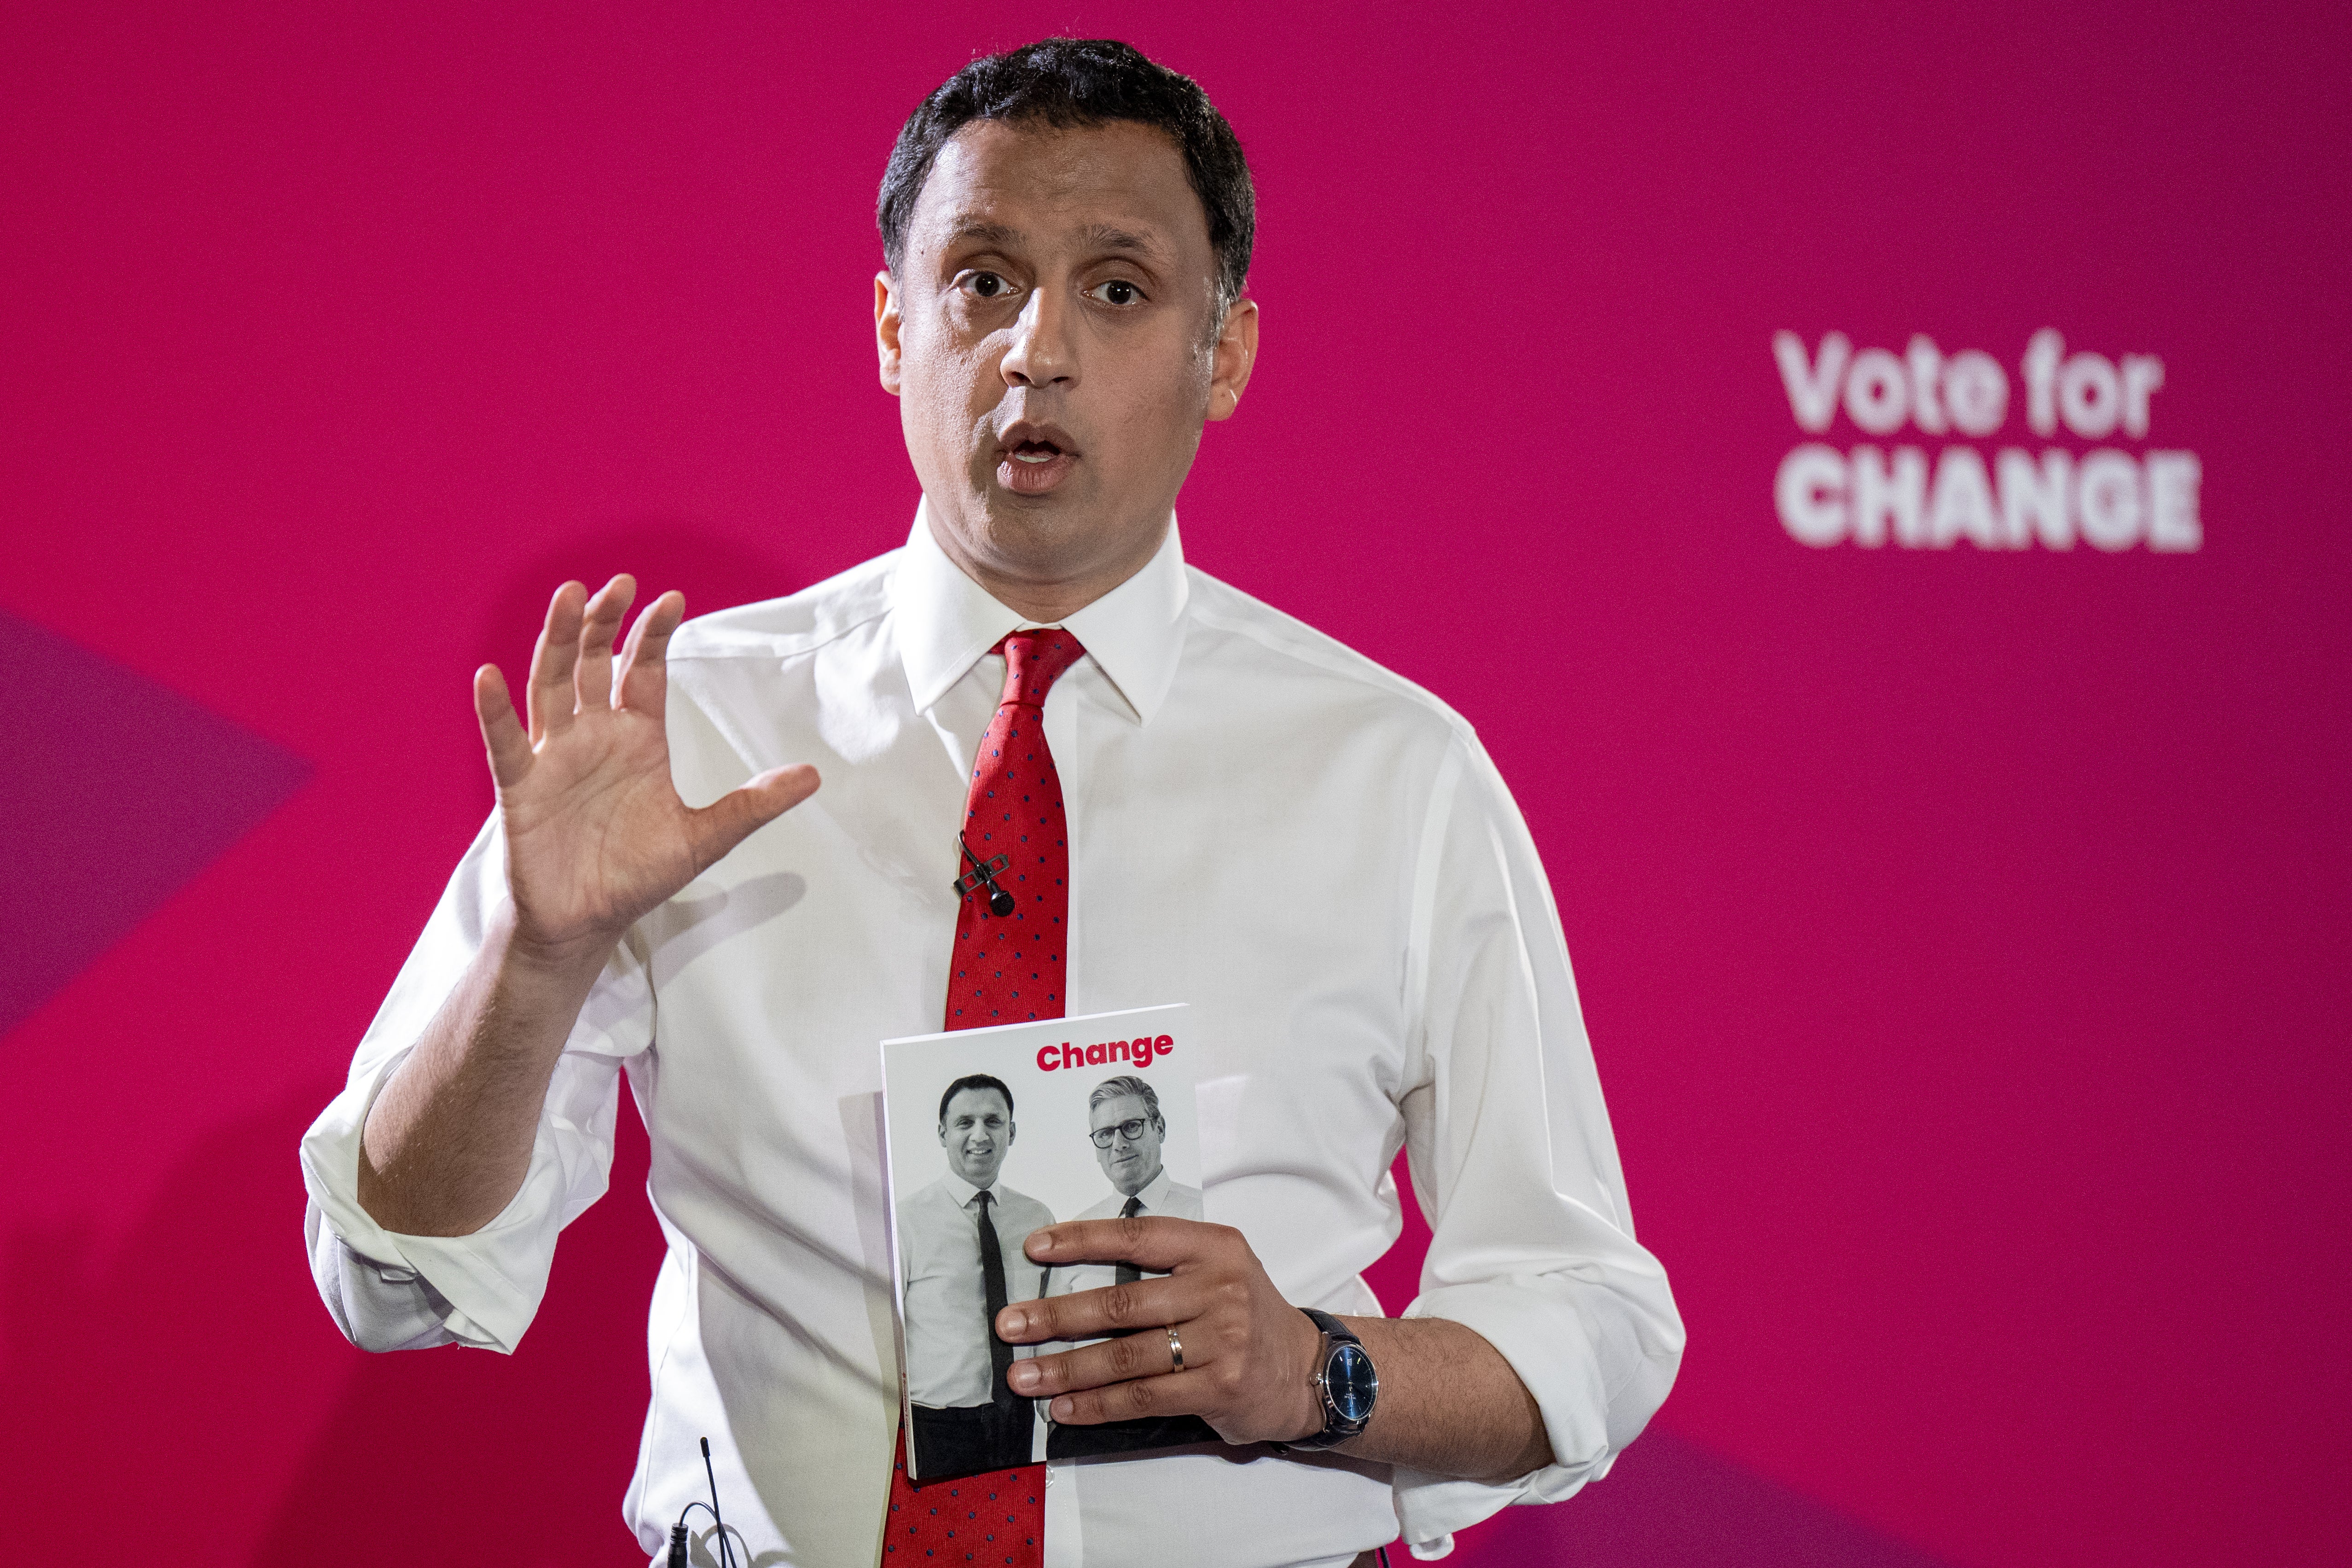 Scottish Labour leader Anas Sarwar said he will only call on people to vote Labour (Jane Barlow/PA)